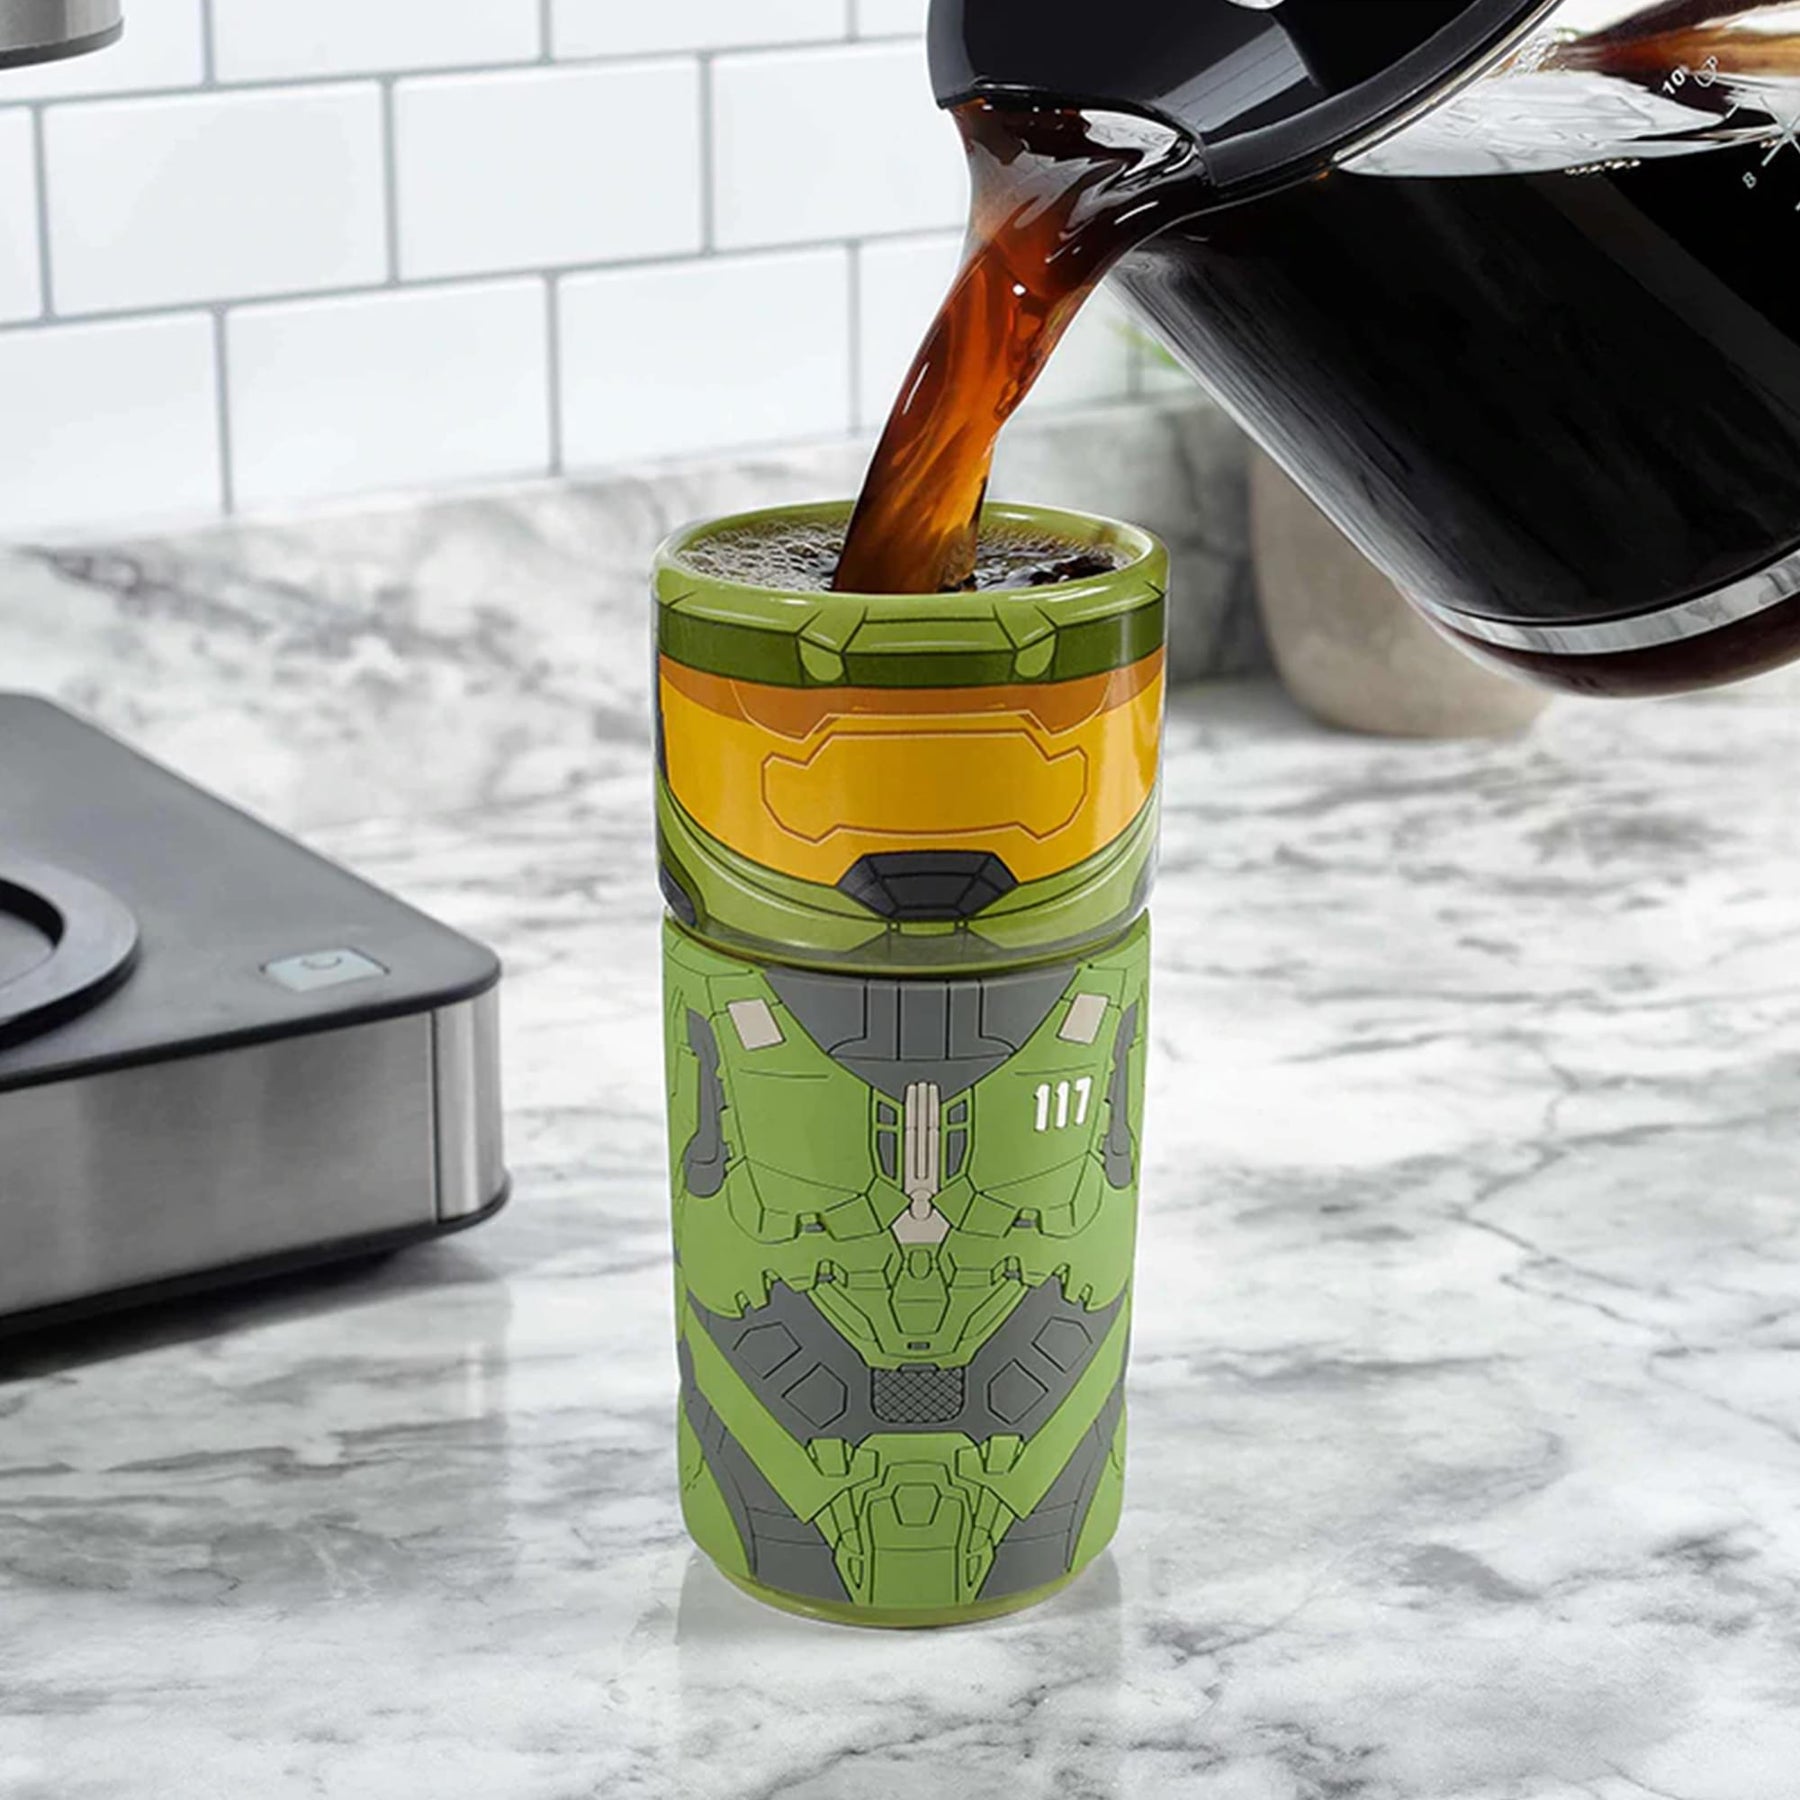 Halo Master Chief 14 Ounce Ceramic CosCup